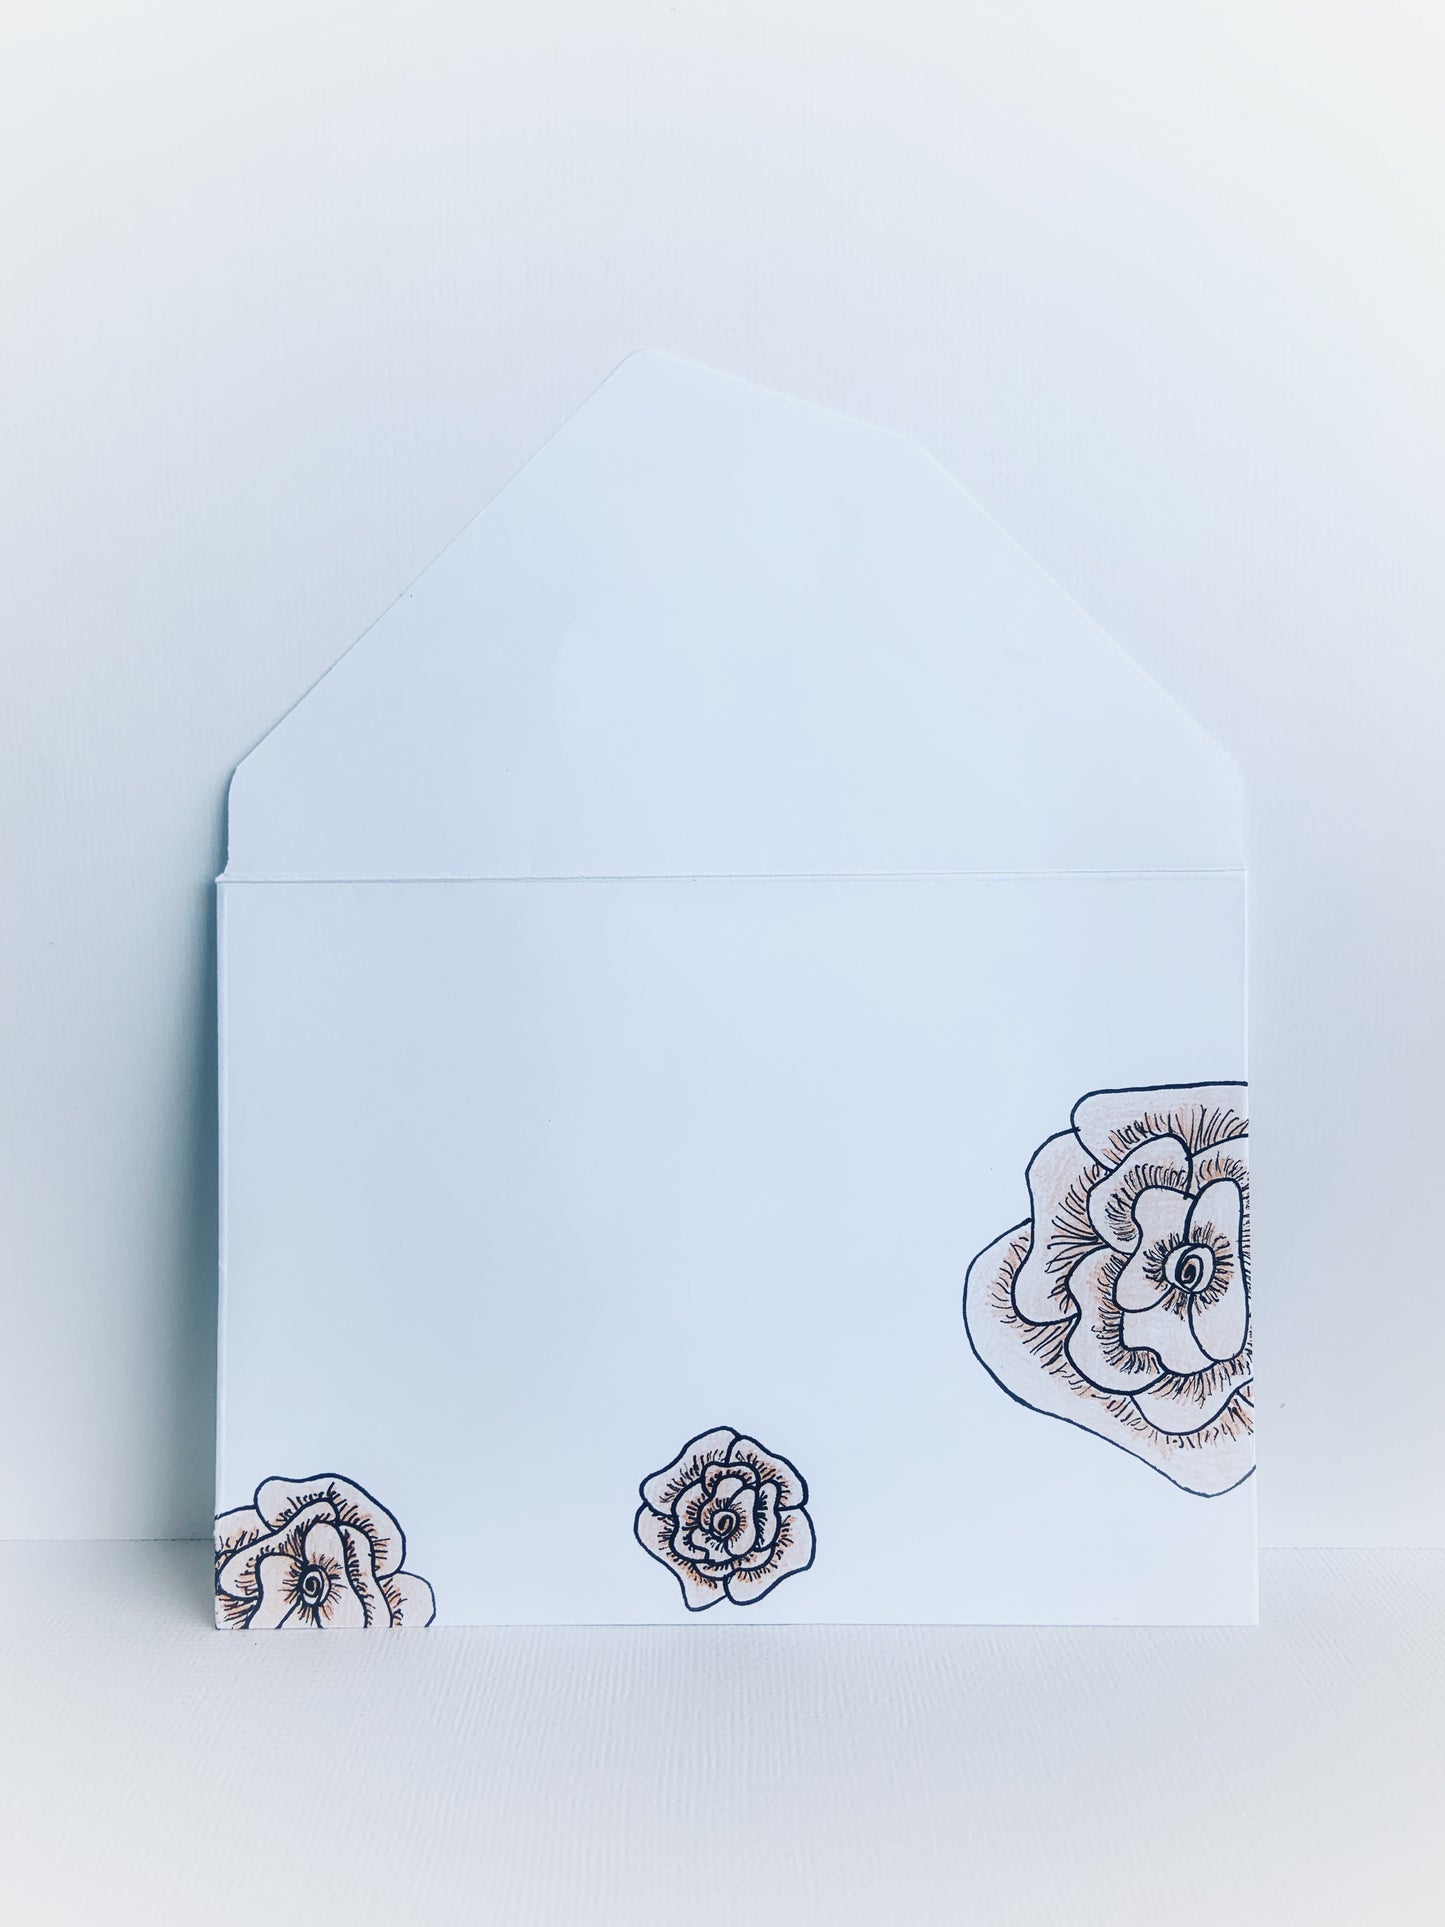 The front of a white handmade envelope with black line drawn flowers colored with soft orange showing detail on the flap.